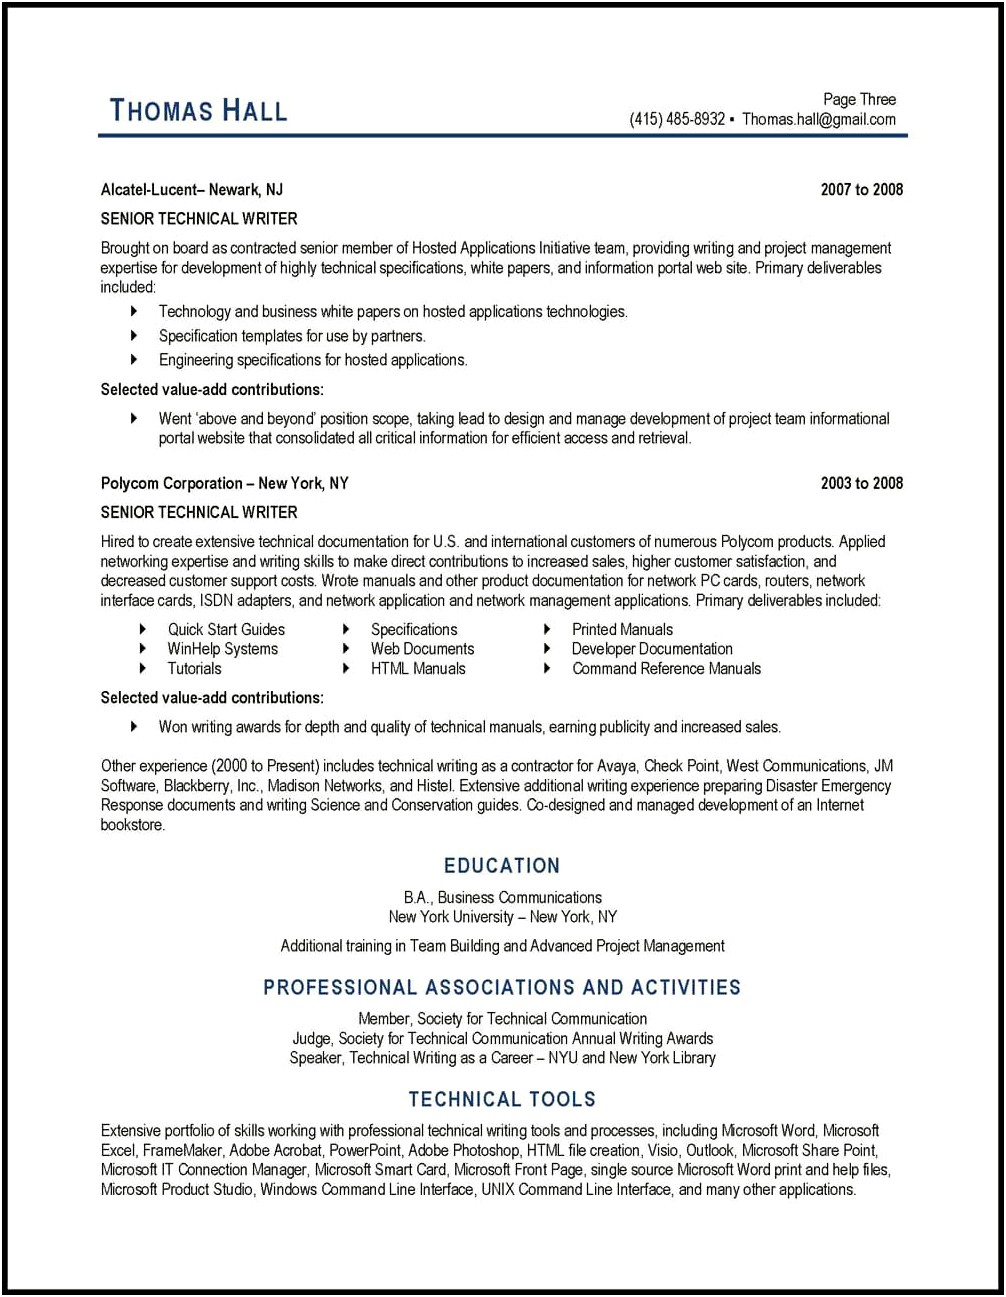 Resume Summary Examples For Technical Writers